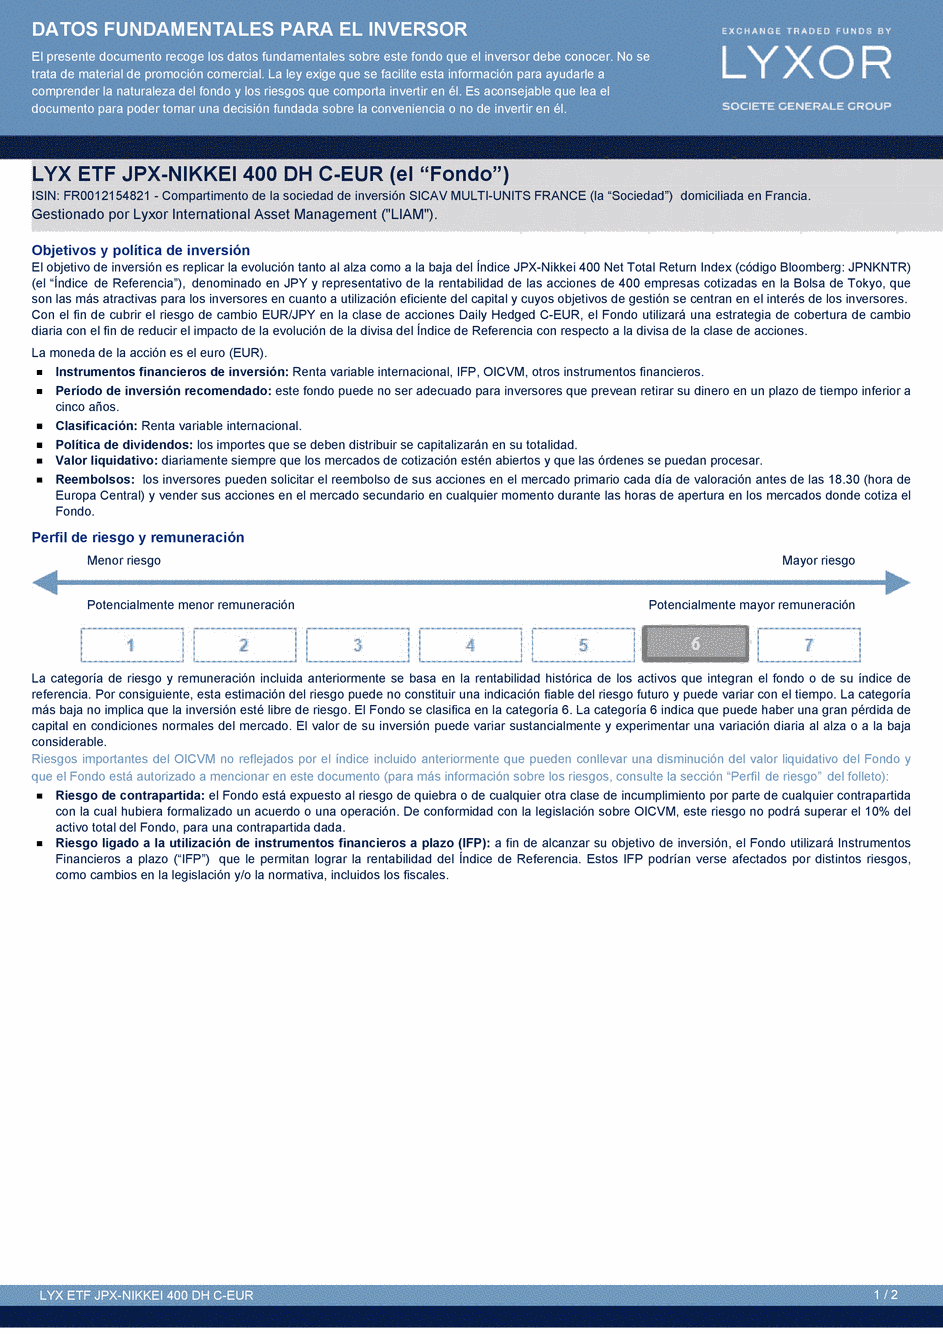 DICI LYXOR JPX-NIKKEI 400 UCITS ETF (DR) Daily Hedged C-EUR - 24/03/2015 - Espagnol